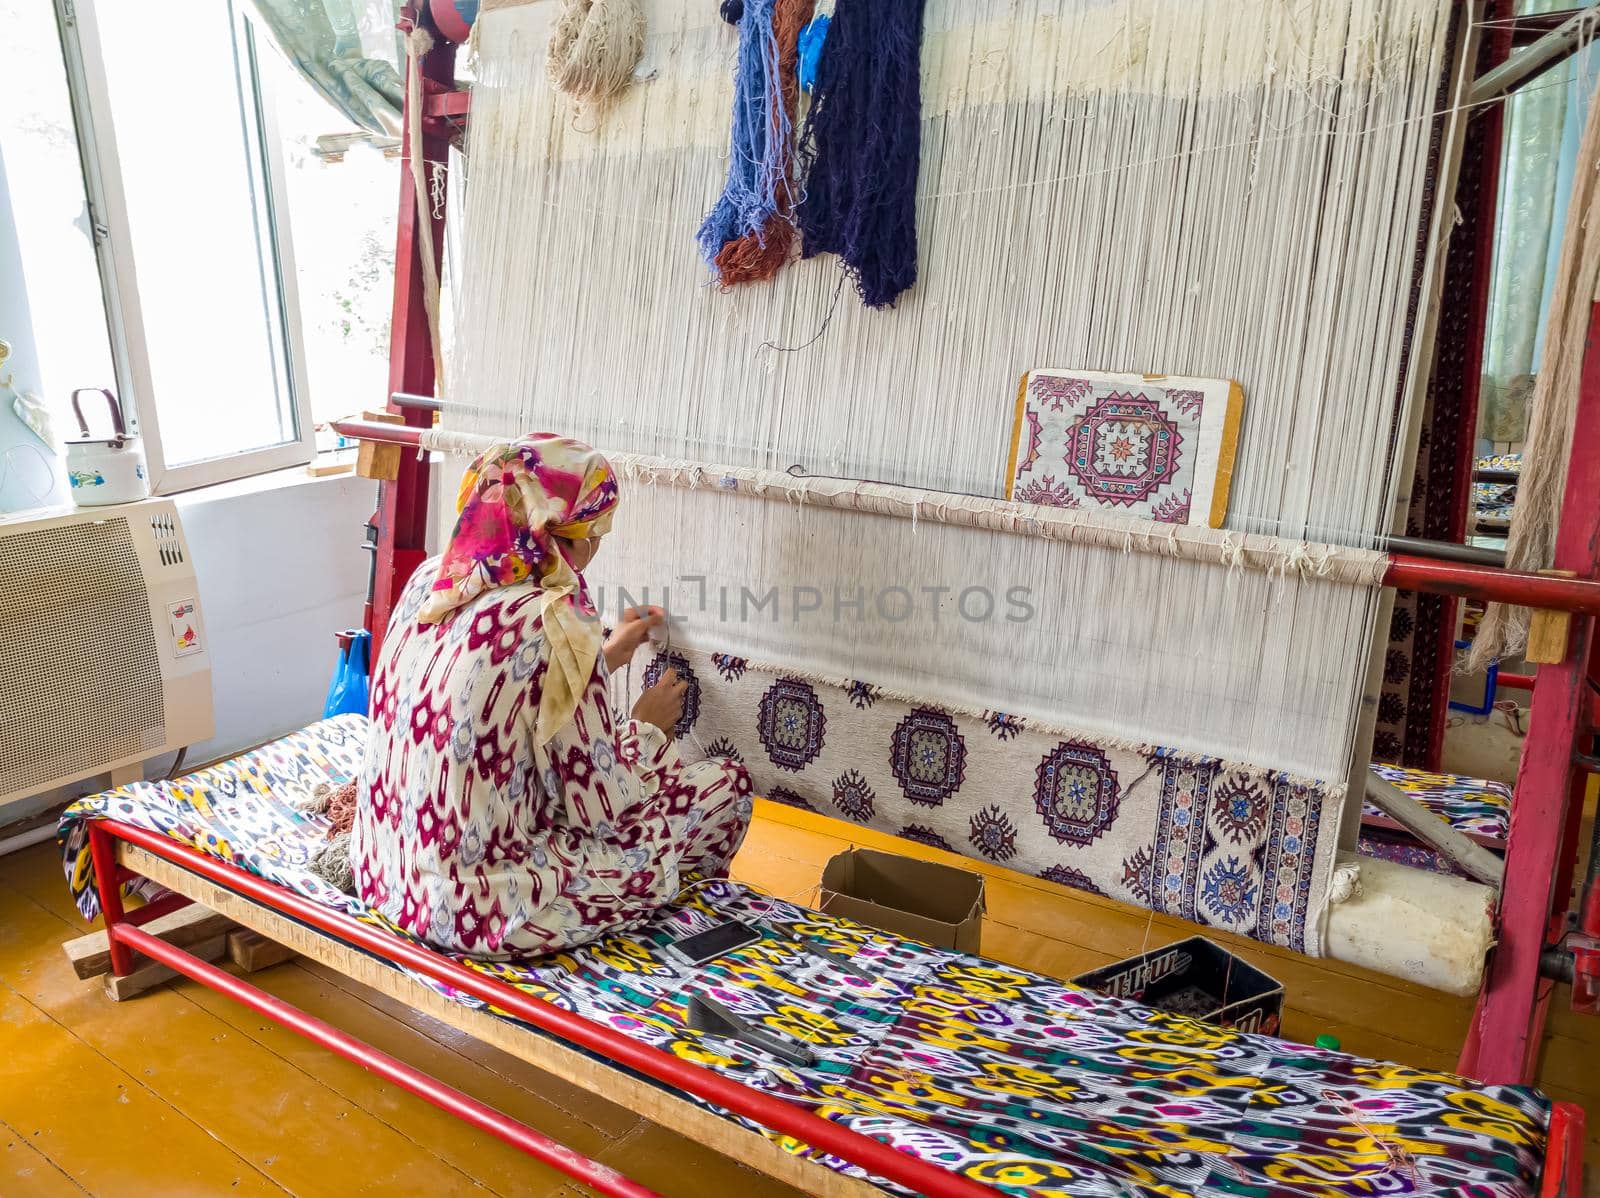 Hands of a woman are weaving carpet tools and threads handmade in Uzbekistan Samarkand Bukhara carpet, textile production folk traditional Muslim work by Milanchikov